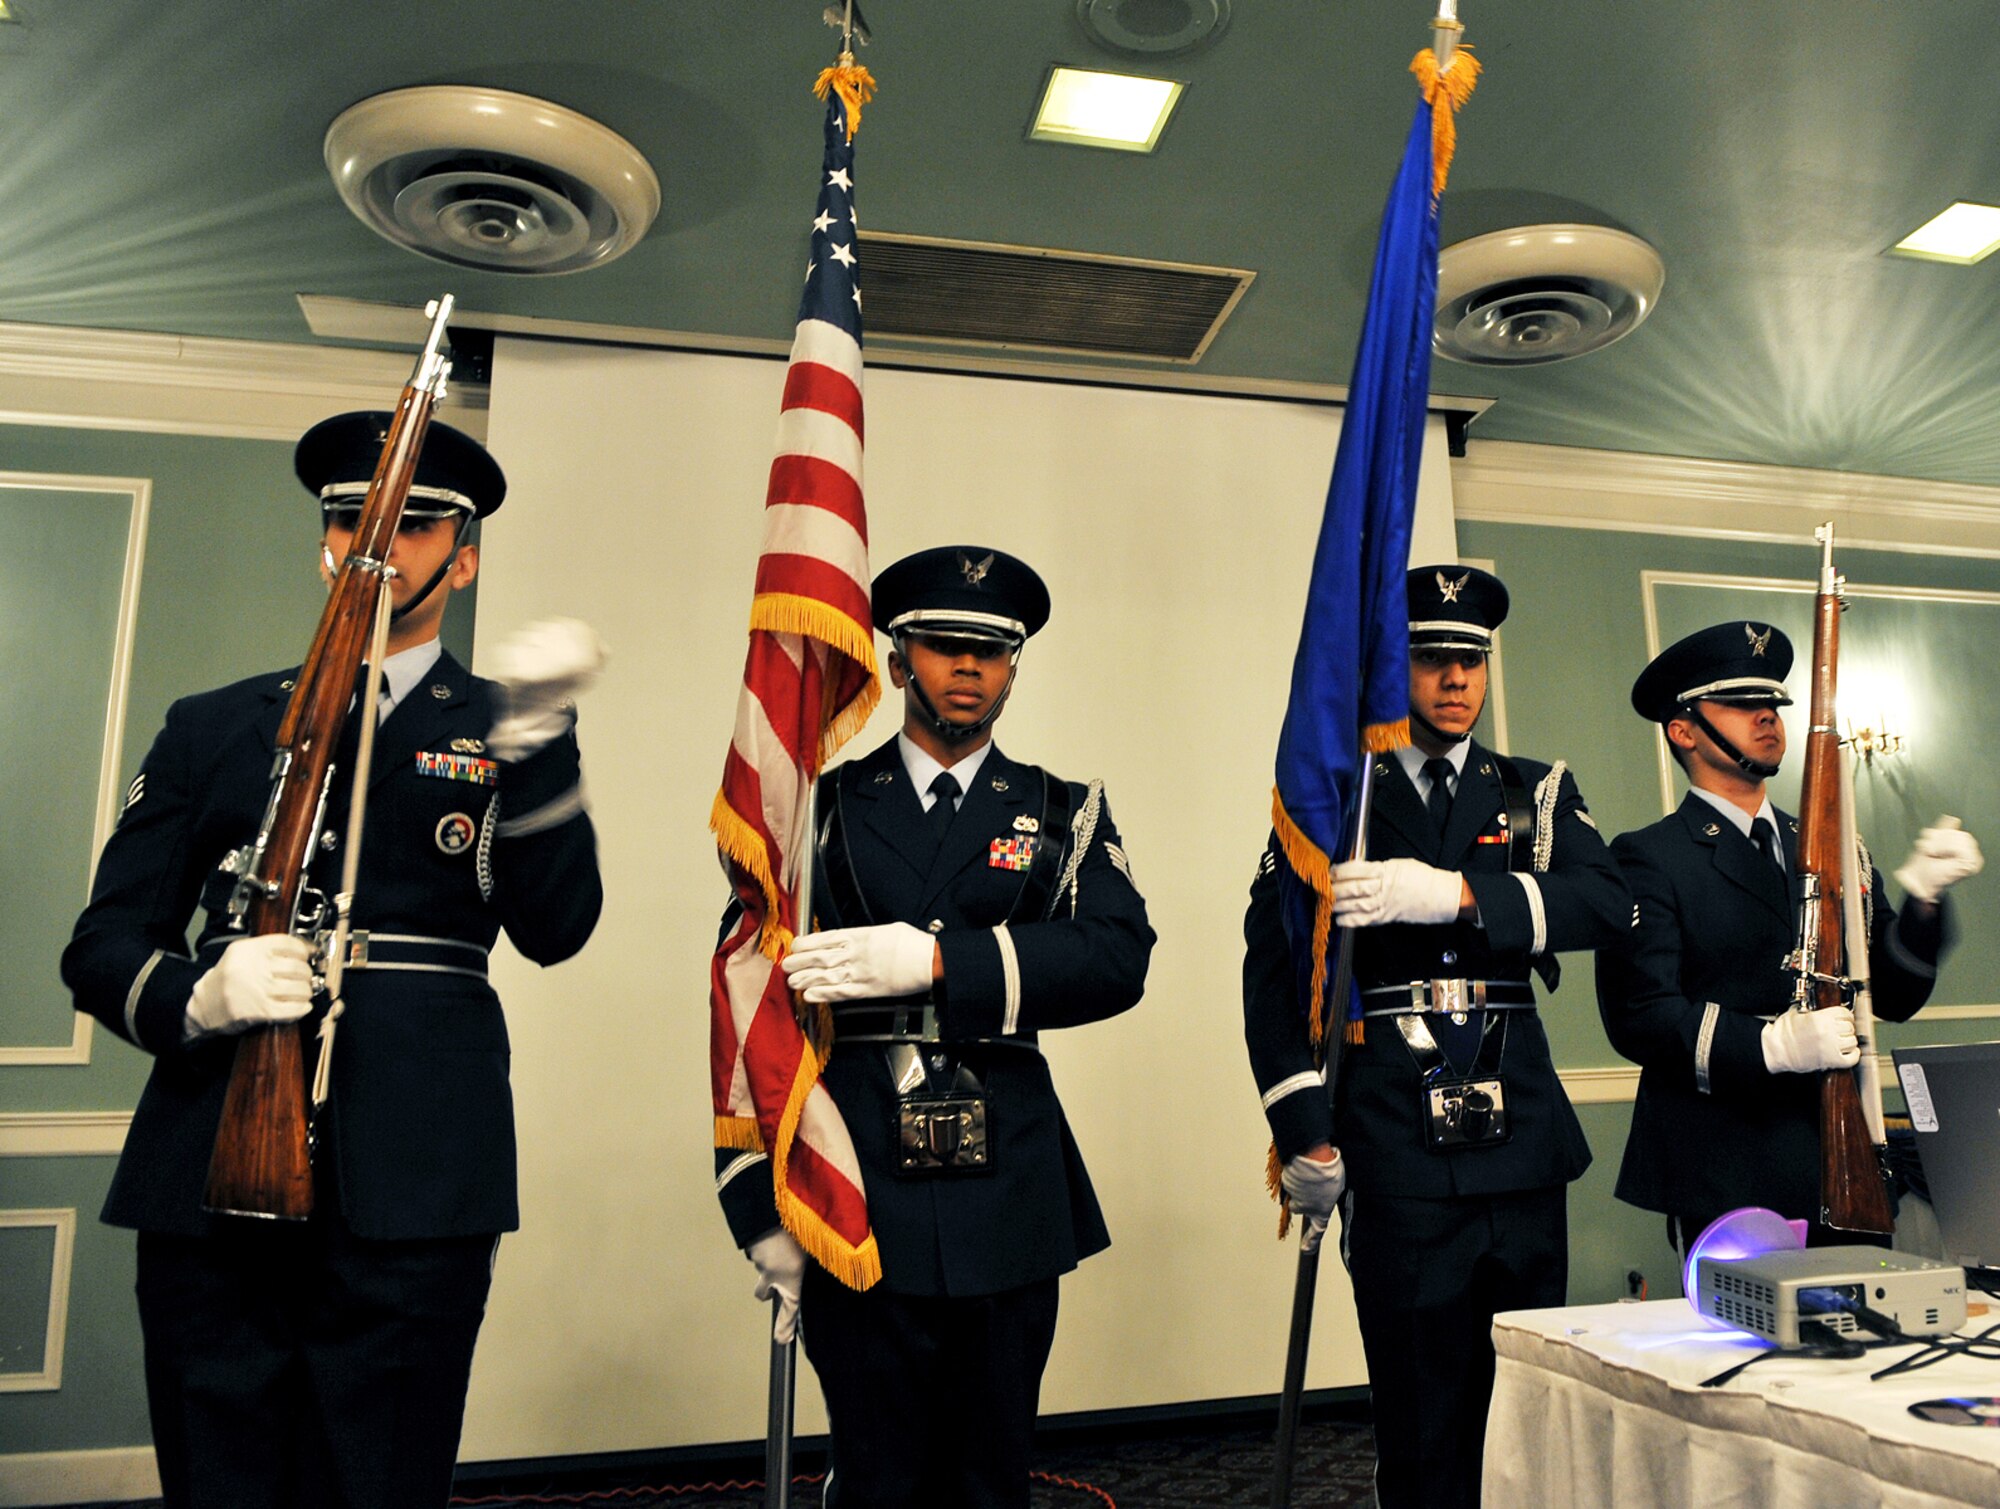 OFFUTT AIR FORCE BASE, Neb. -- Members of the Offutt Honor Guard post the colors during the Volunteer Appreciation Reception at the Patriot Club here April 28. More than 80 people from various organizations on and off-base attended the event to honor the contributions of Offutt's many volunteers. U.S. Air Force photo by Charles Haymond